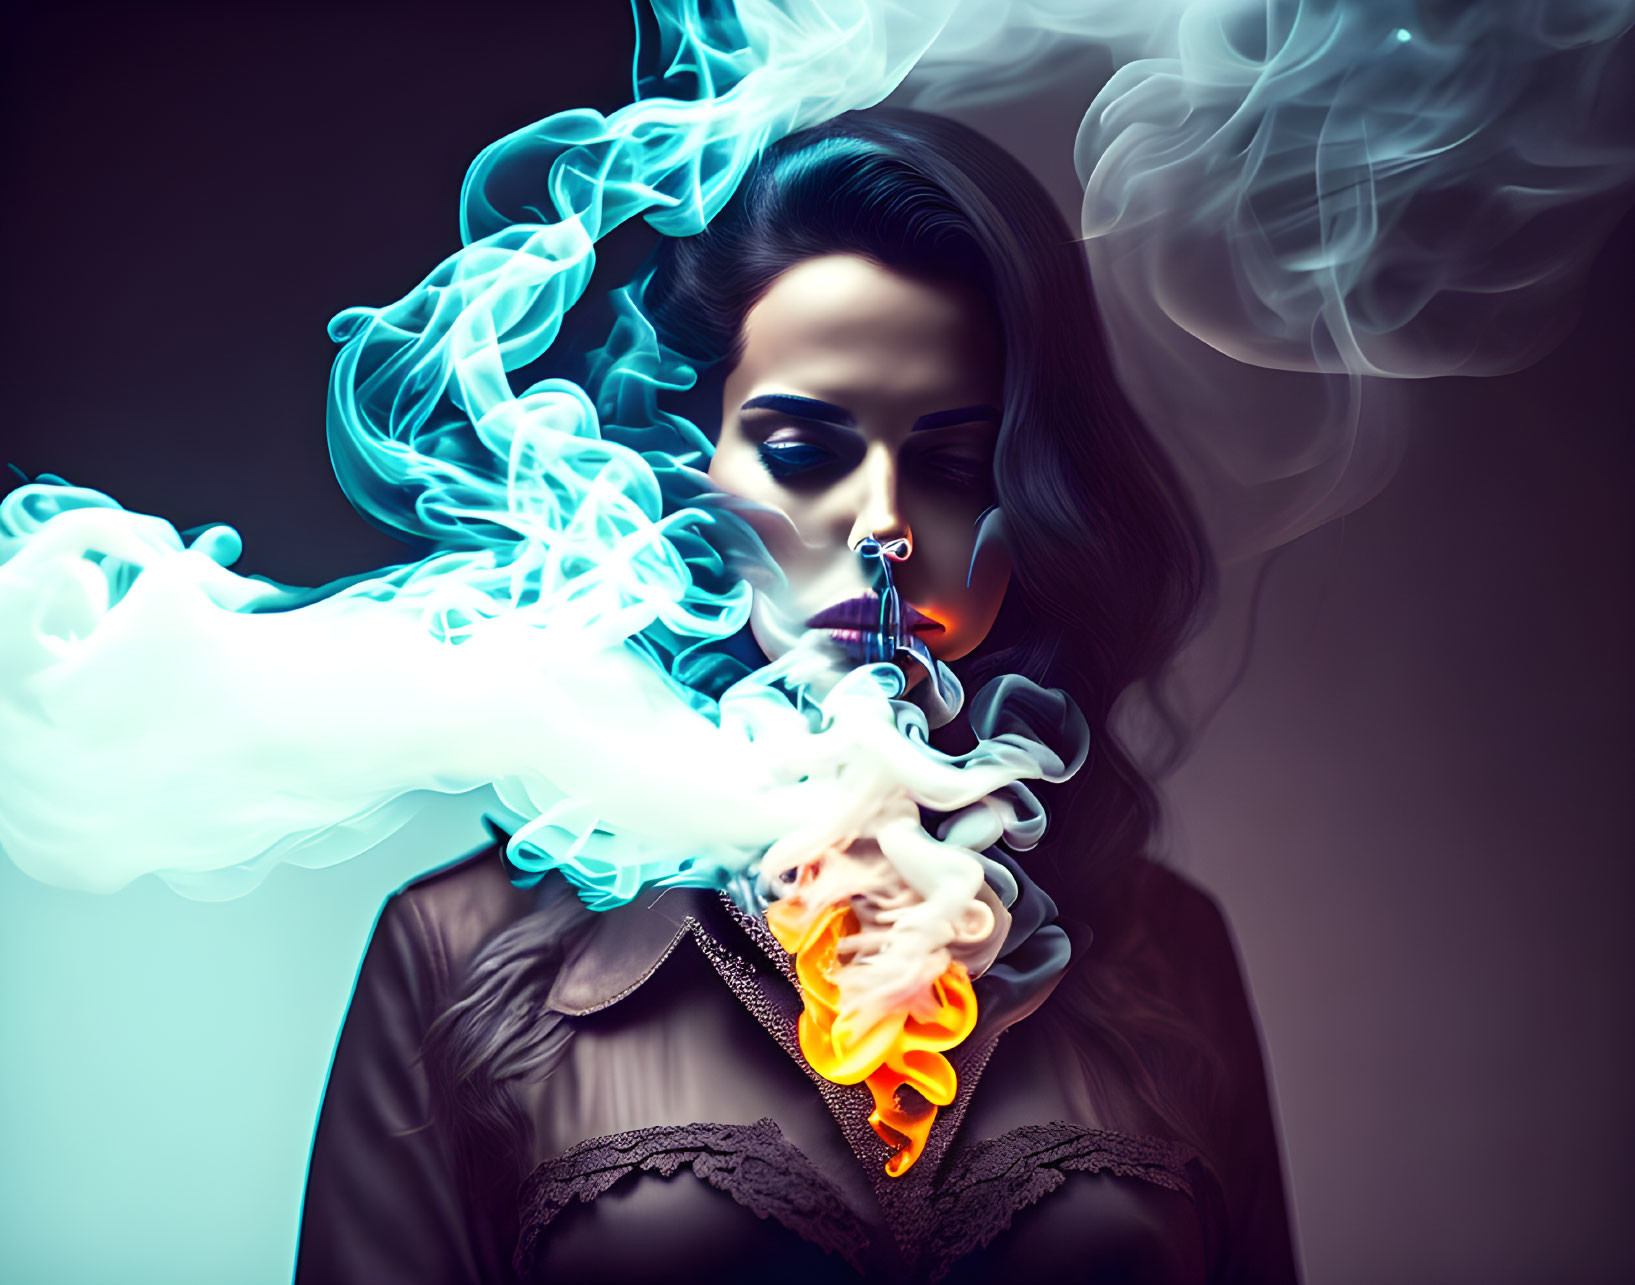 Dark-haired woman exhales colorful smoke in blue and orange hues.